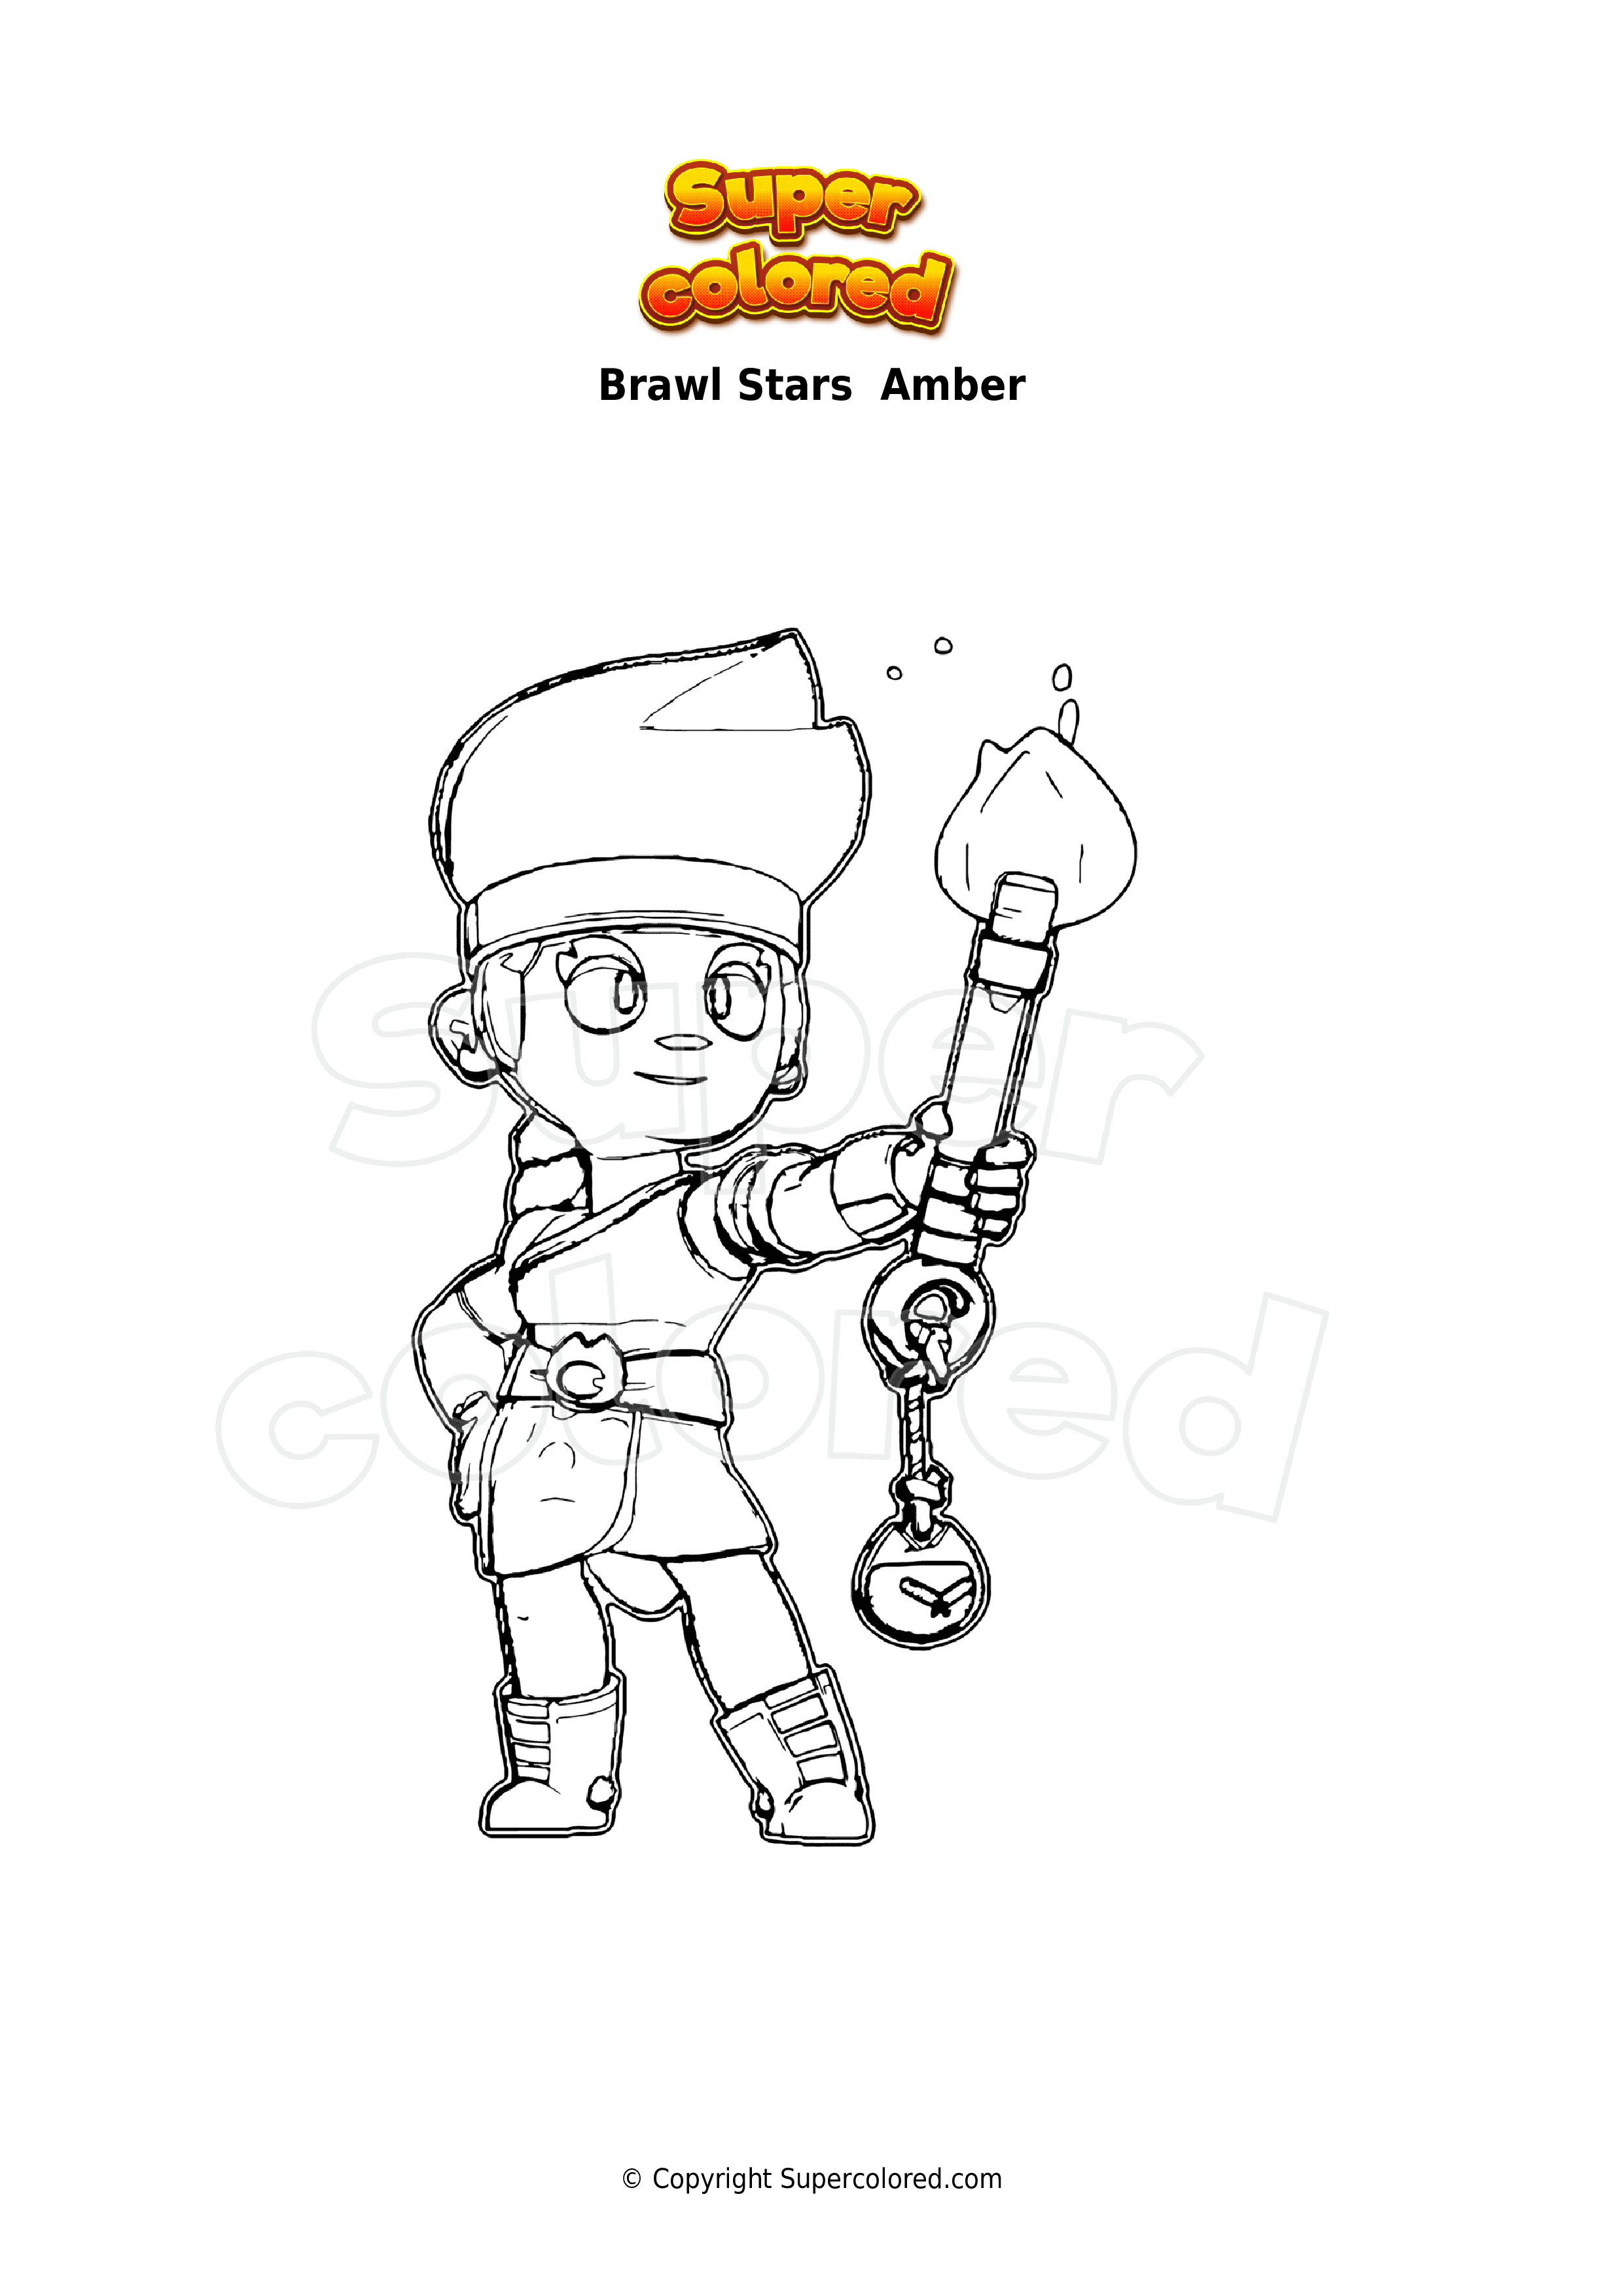 Brawl Stars Amber Coloring Pages In 2020 Coloring Pages Star Cards Porn Sex Picture